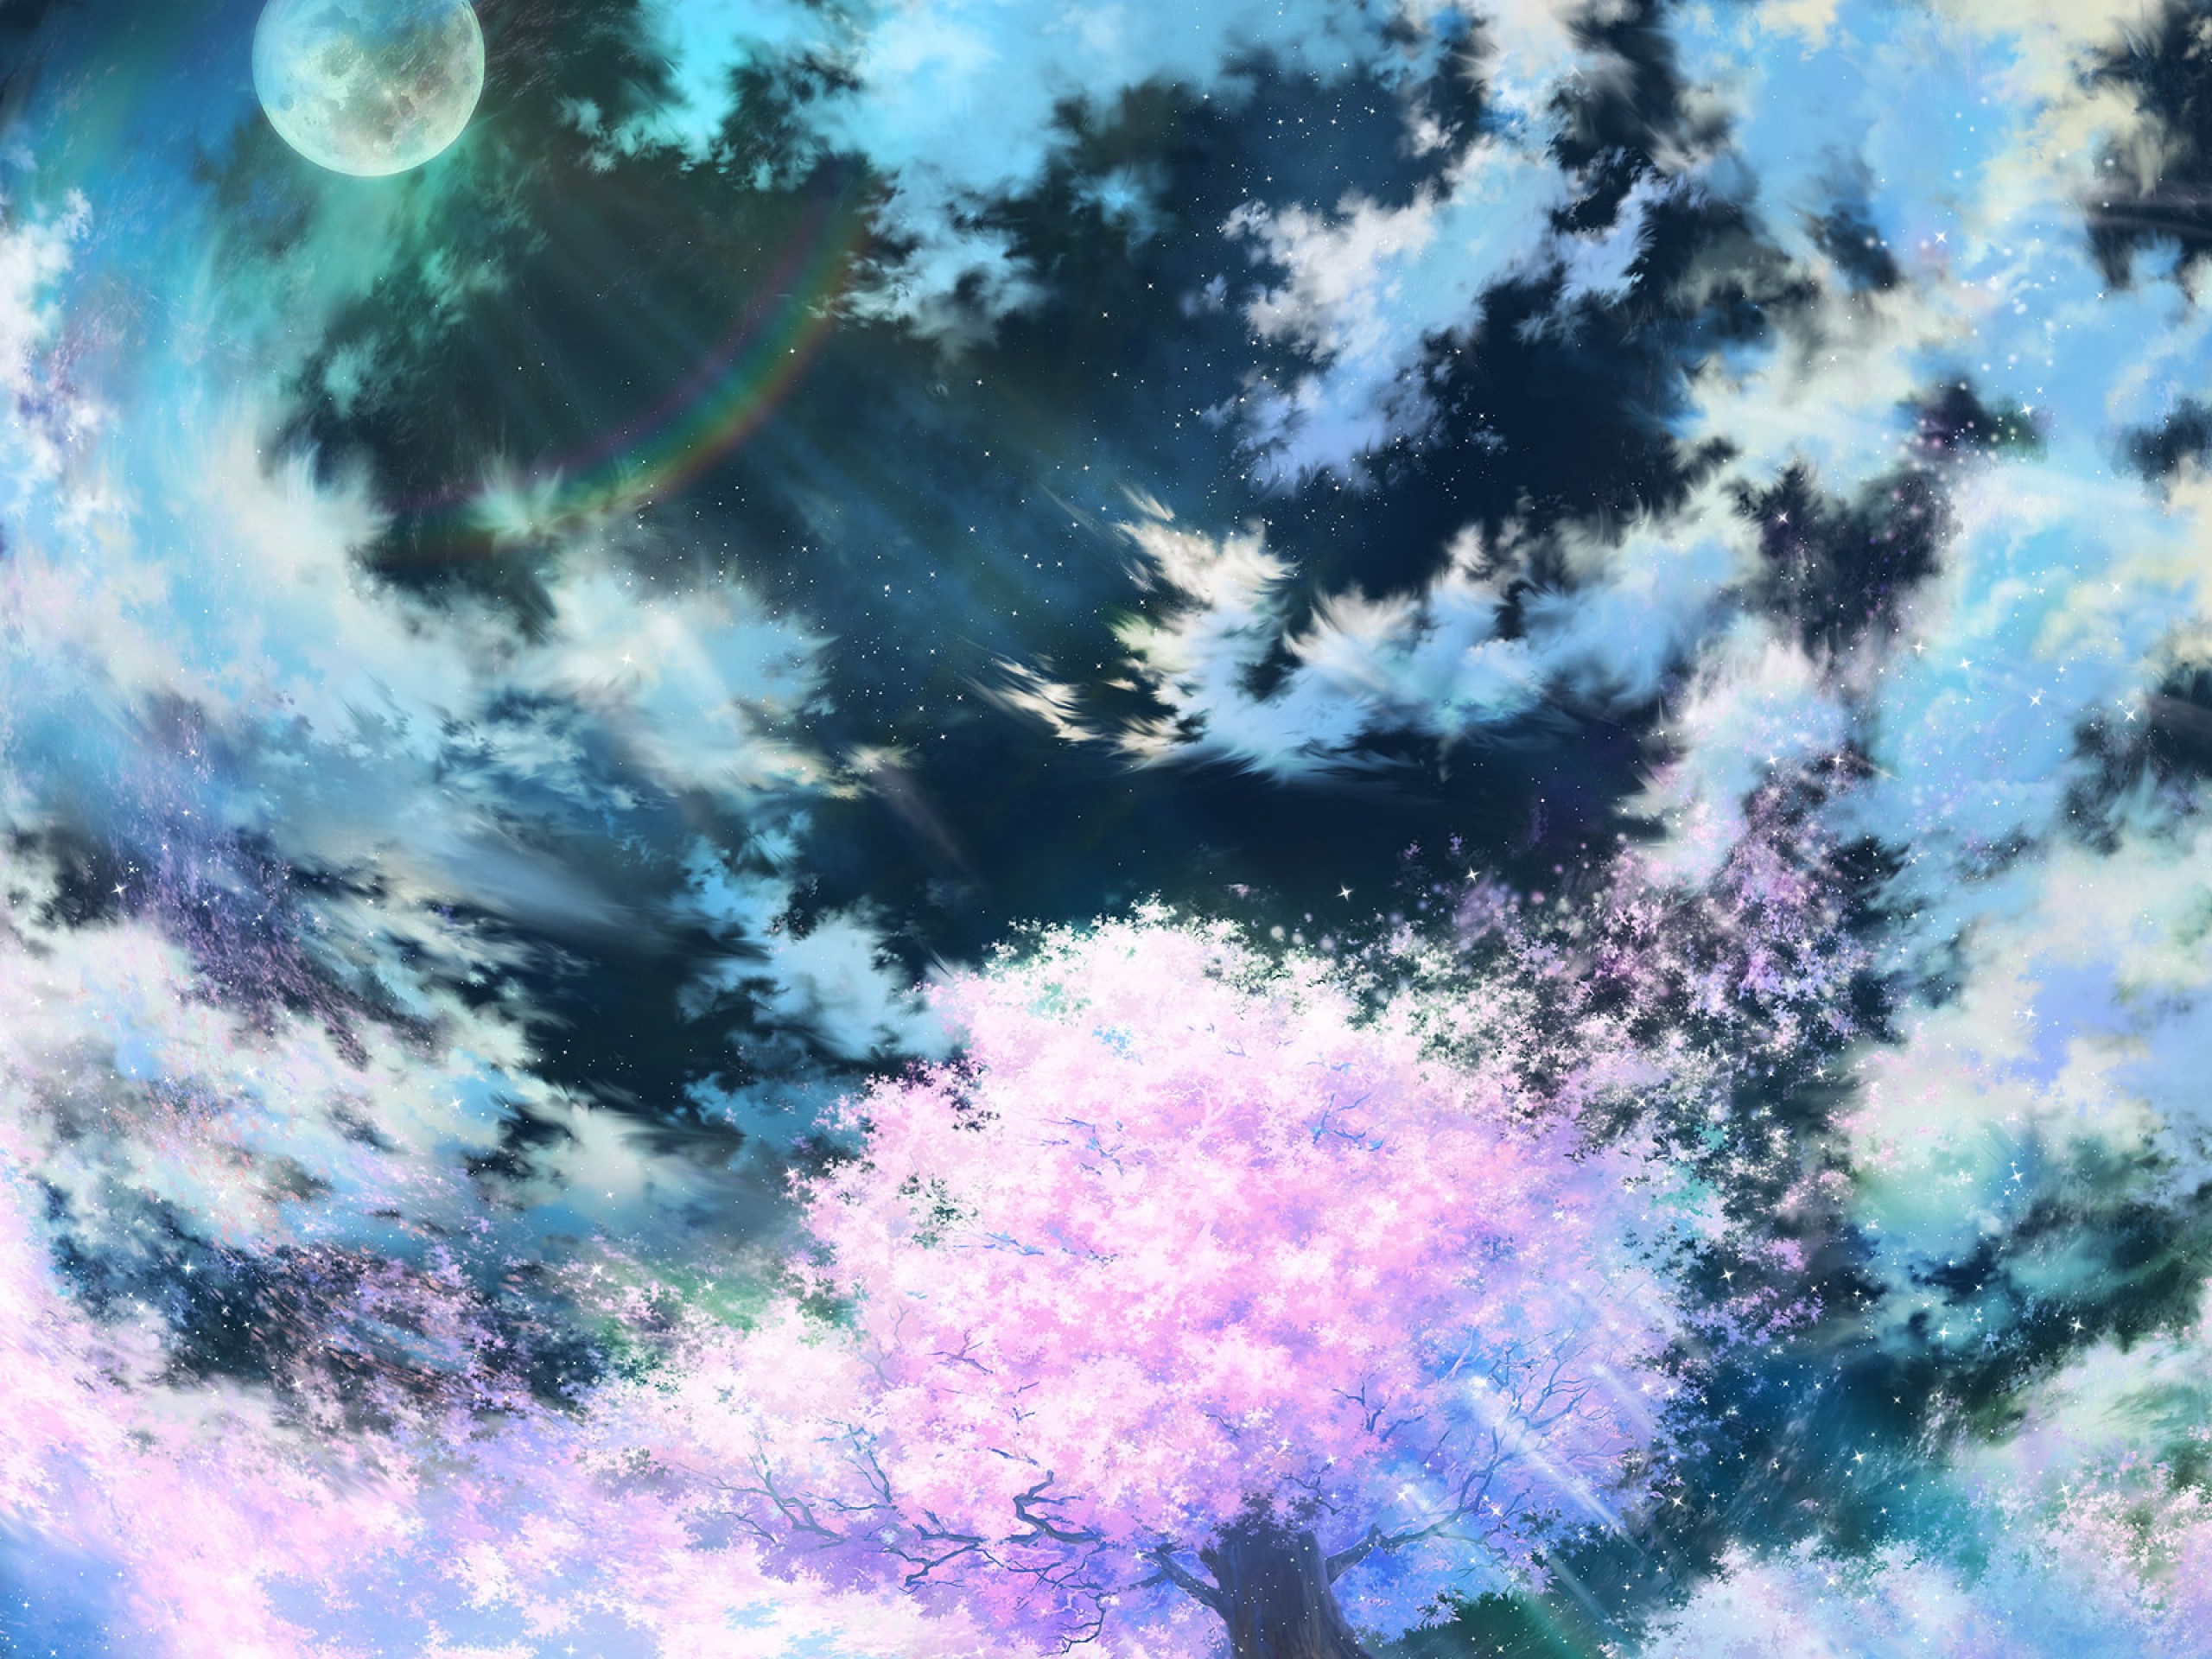 Mobile wallpaper: Sakura, Anime, Pink, Sky, Art, 84612 download the picture for free